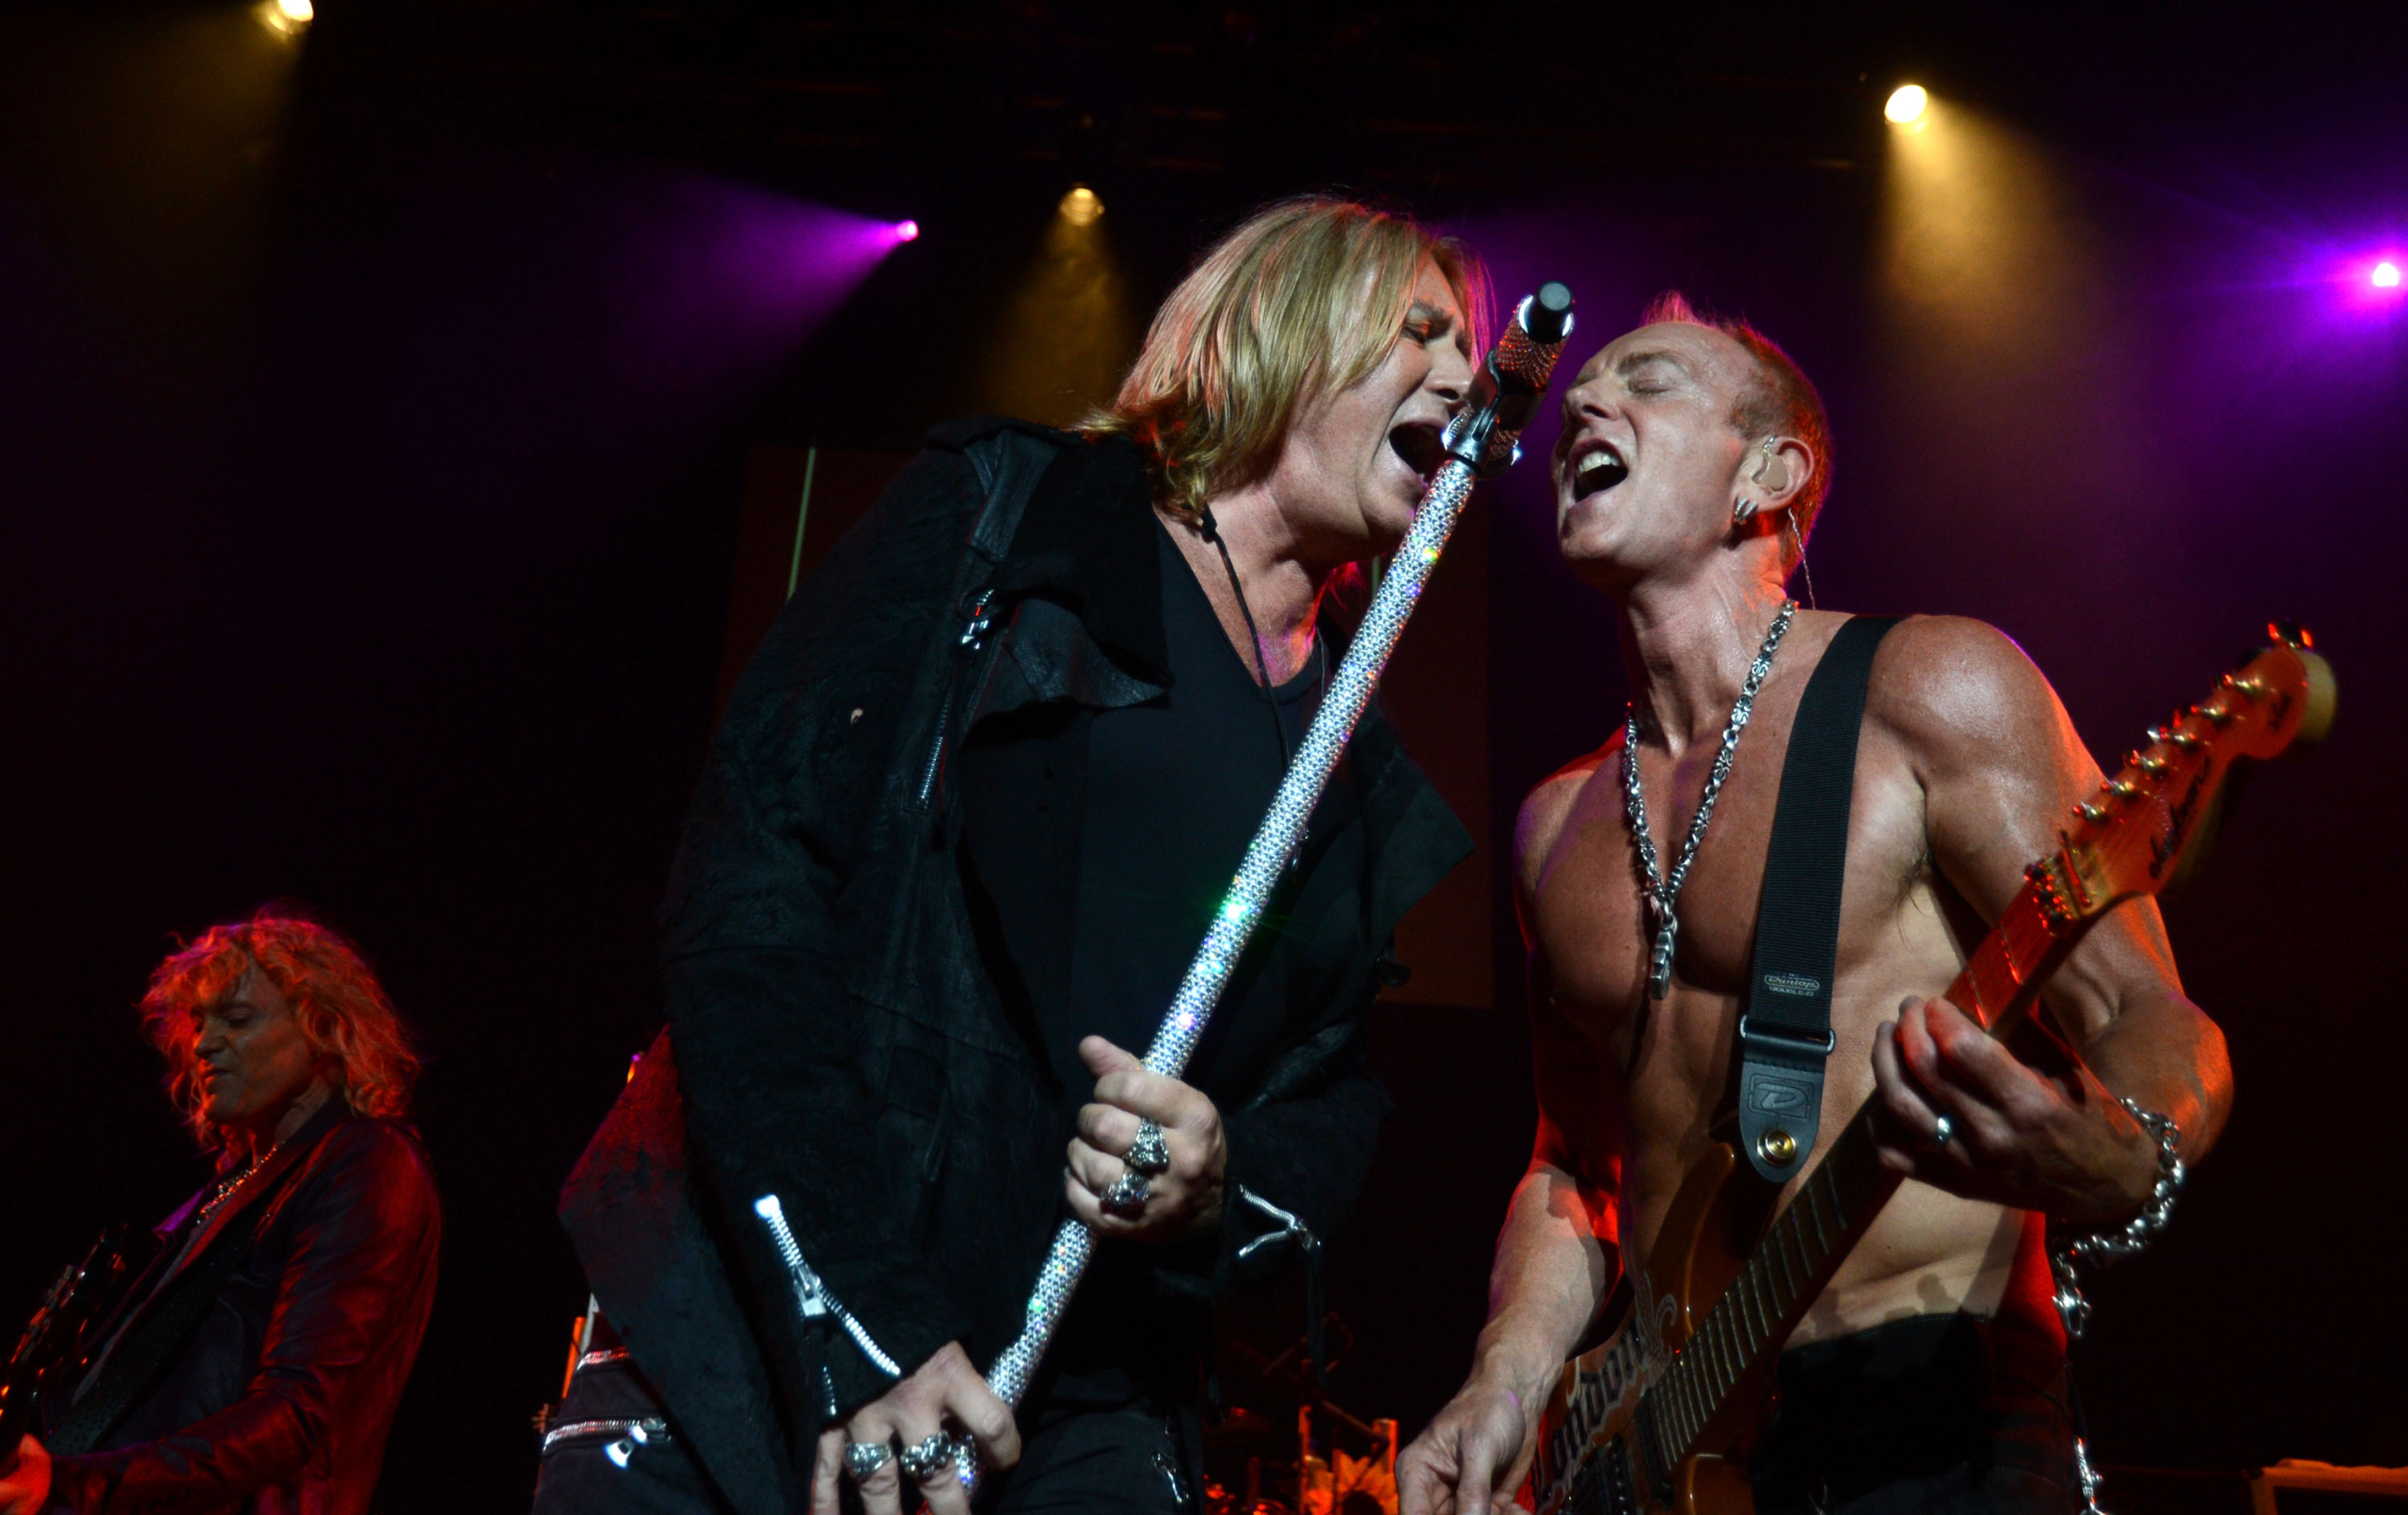 Def Leppard “Very Eager” to finally hit the road for THE Stadium Tour